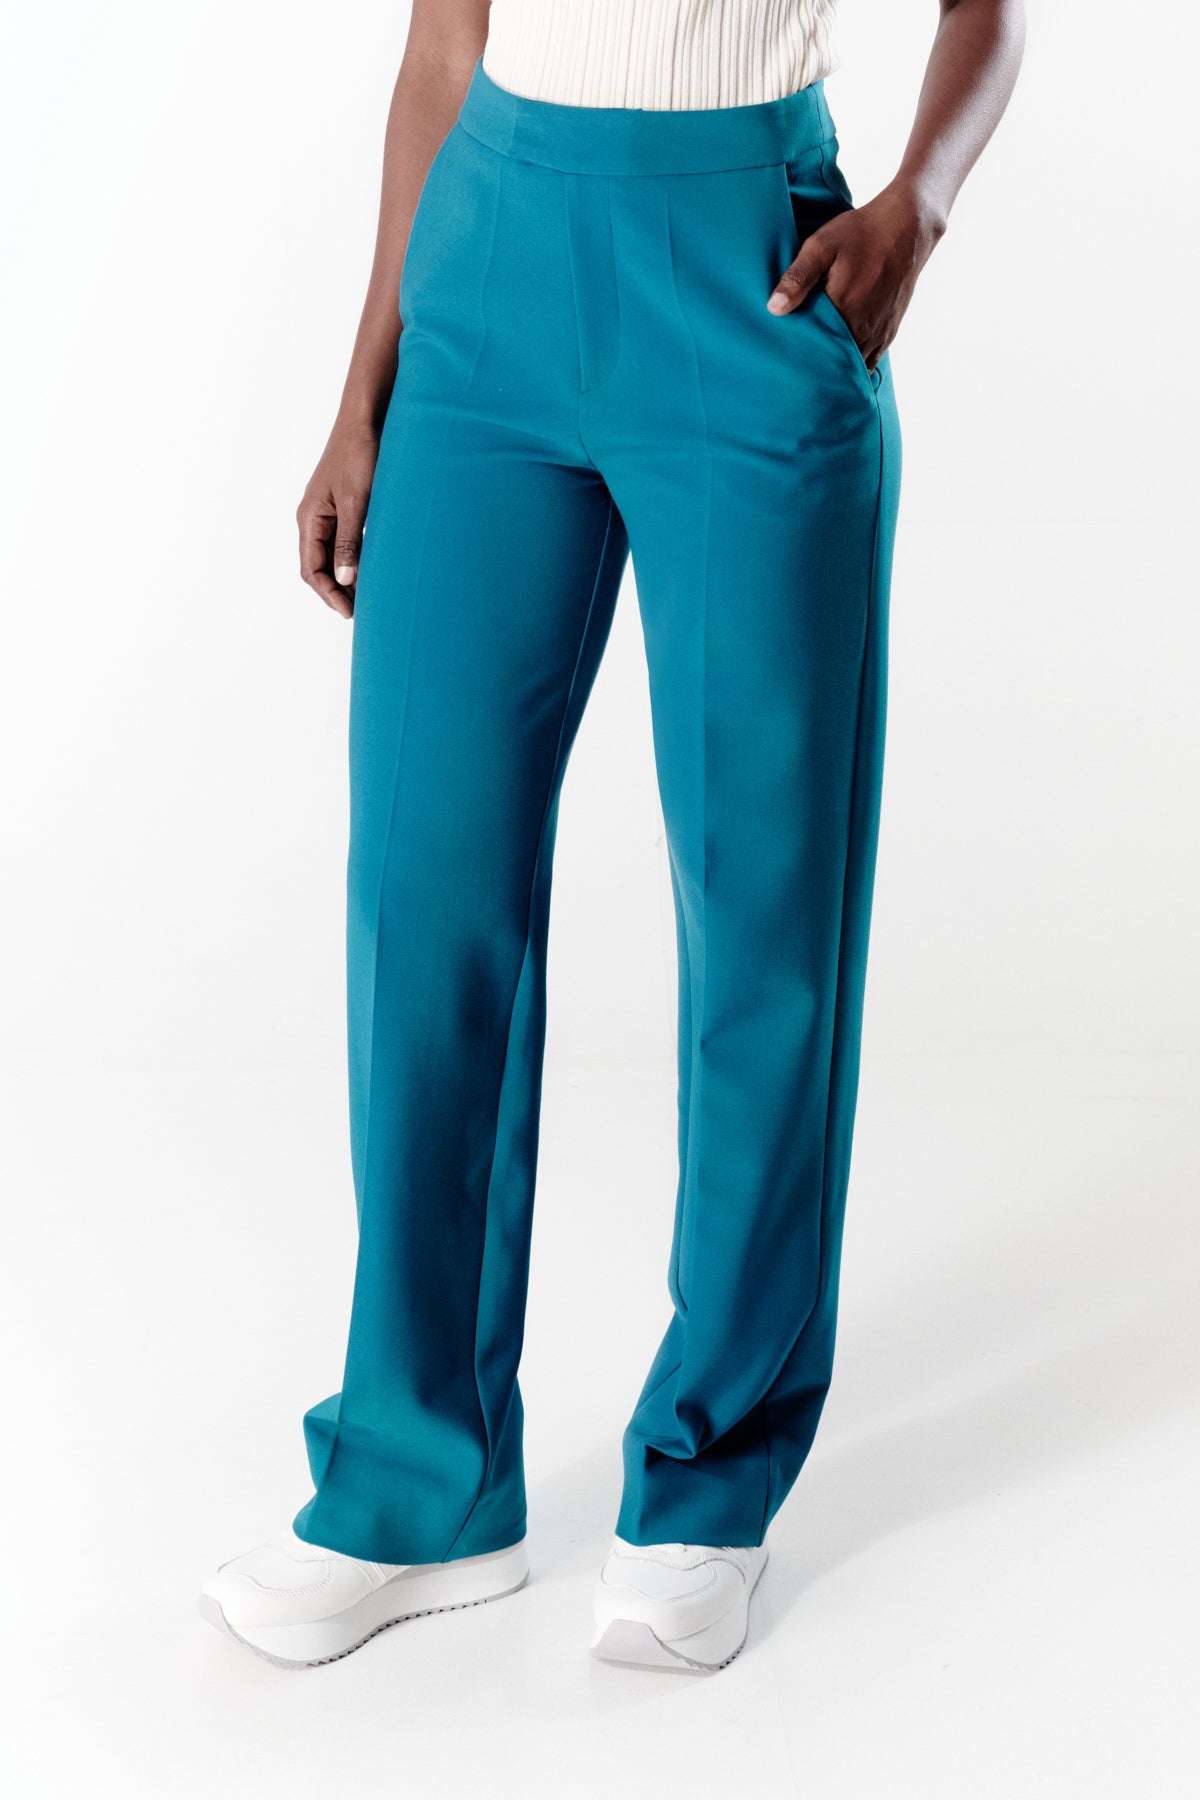 Jo TURQUOISE Trousers